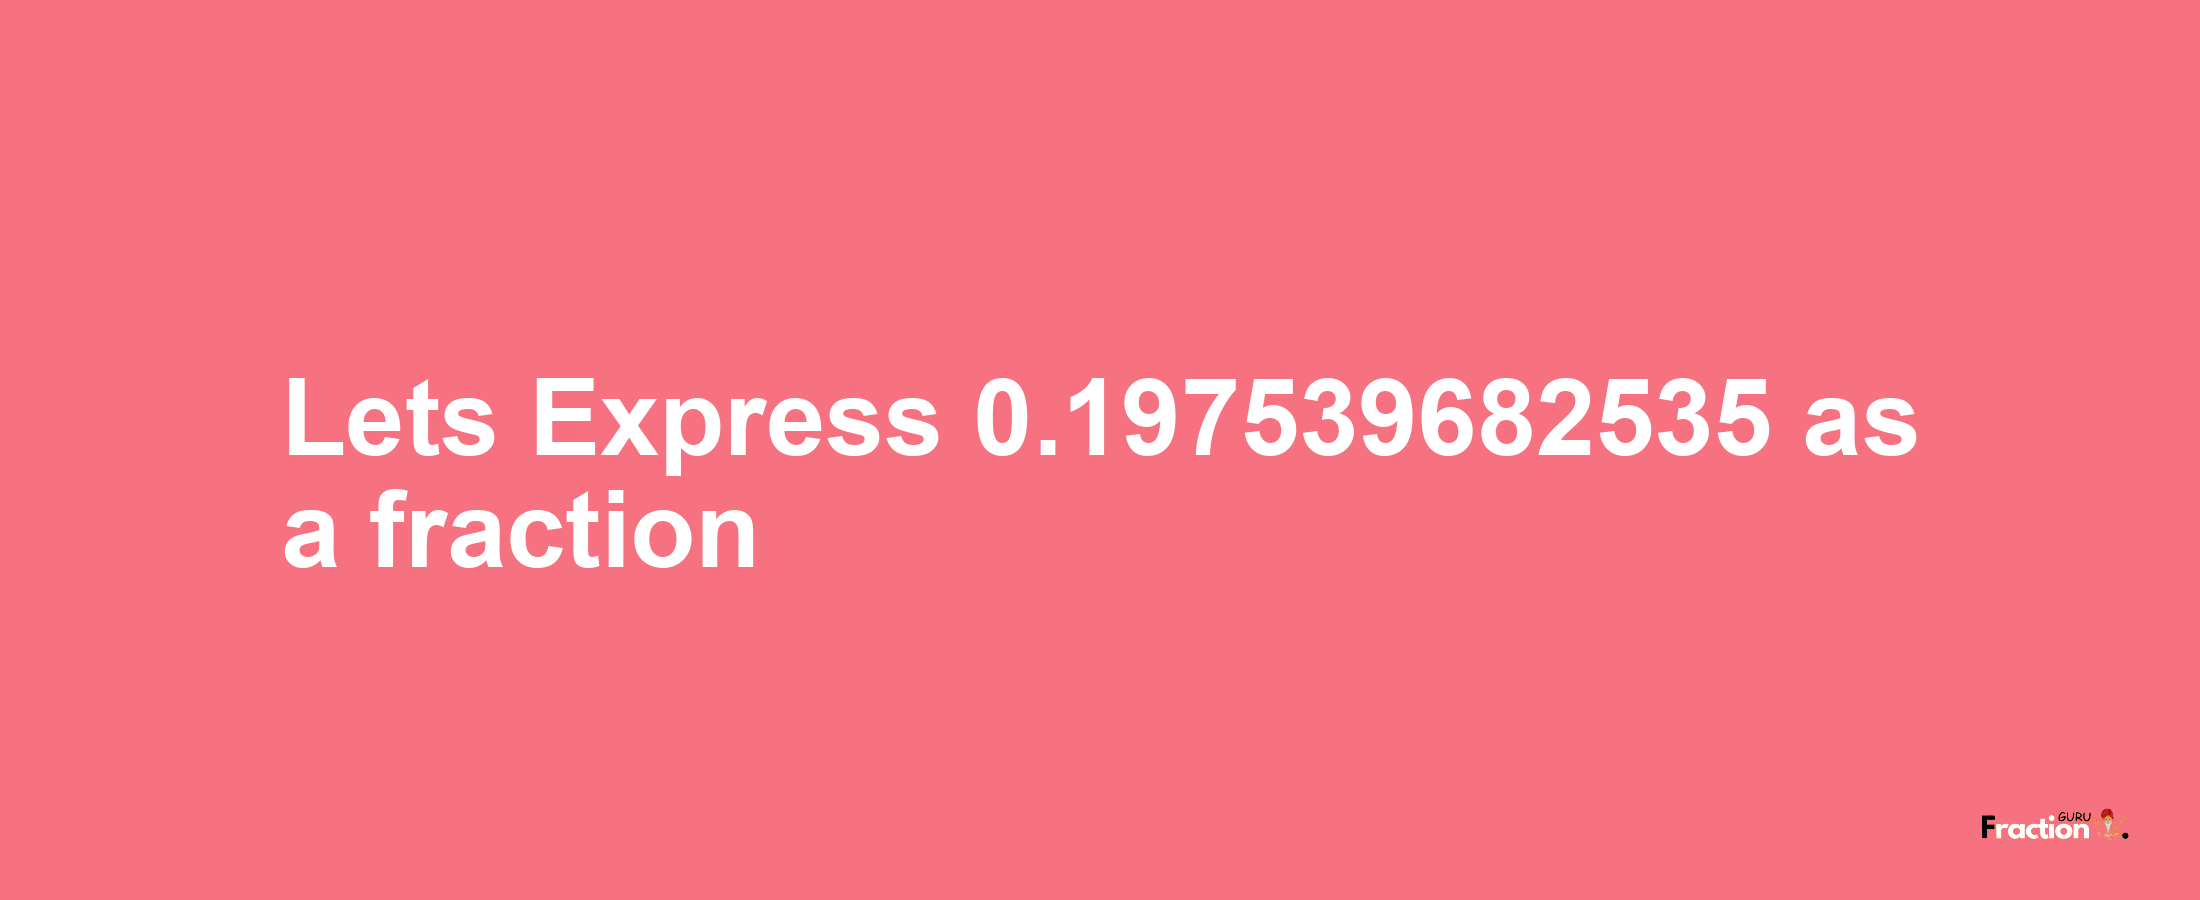 Lets Express 0.197539682535 as afraction